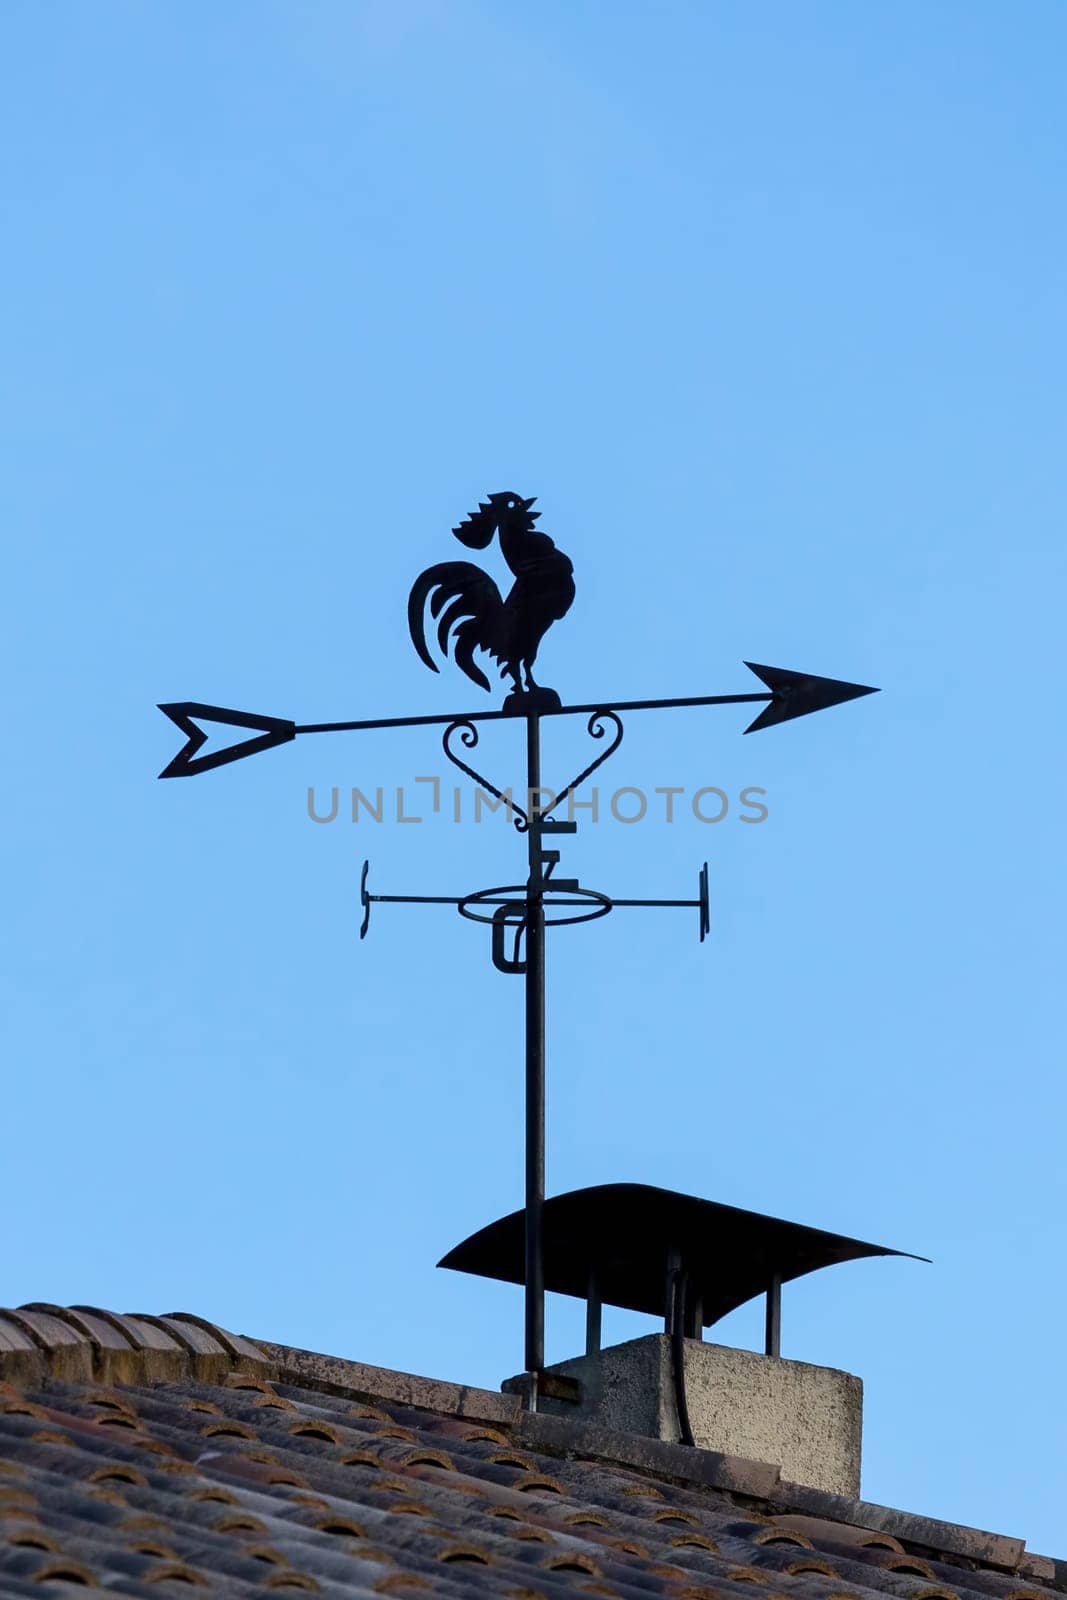 There is a nice weathercock on the roof by Digoarpi